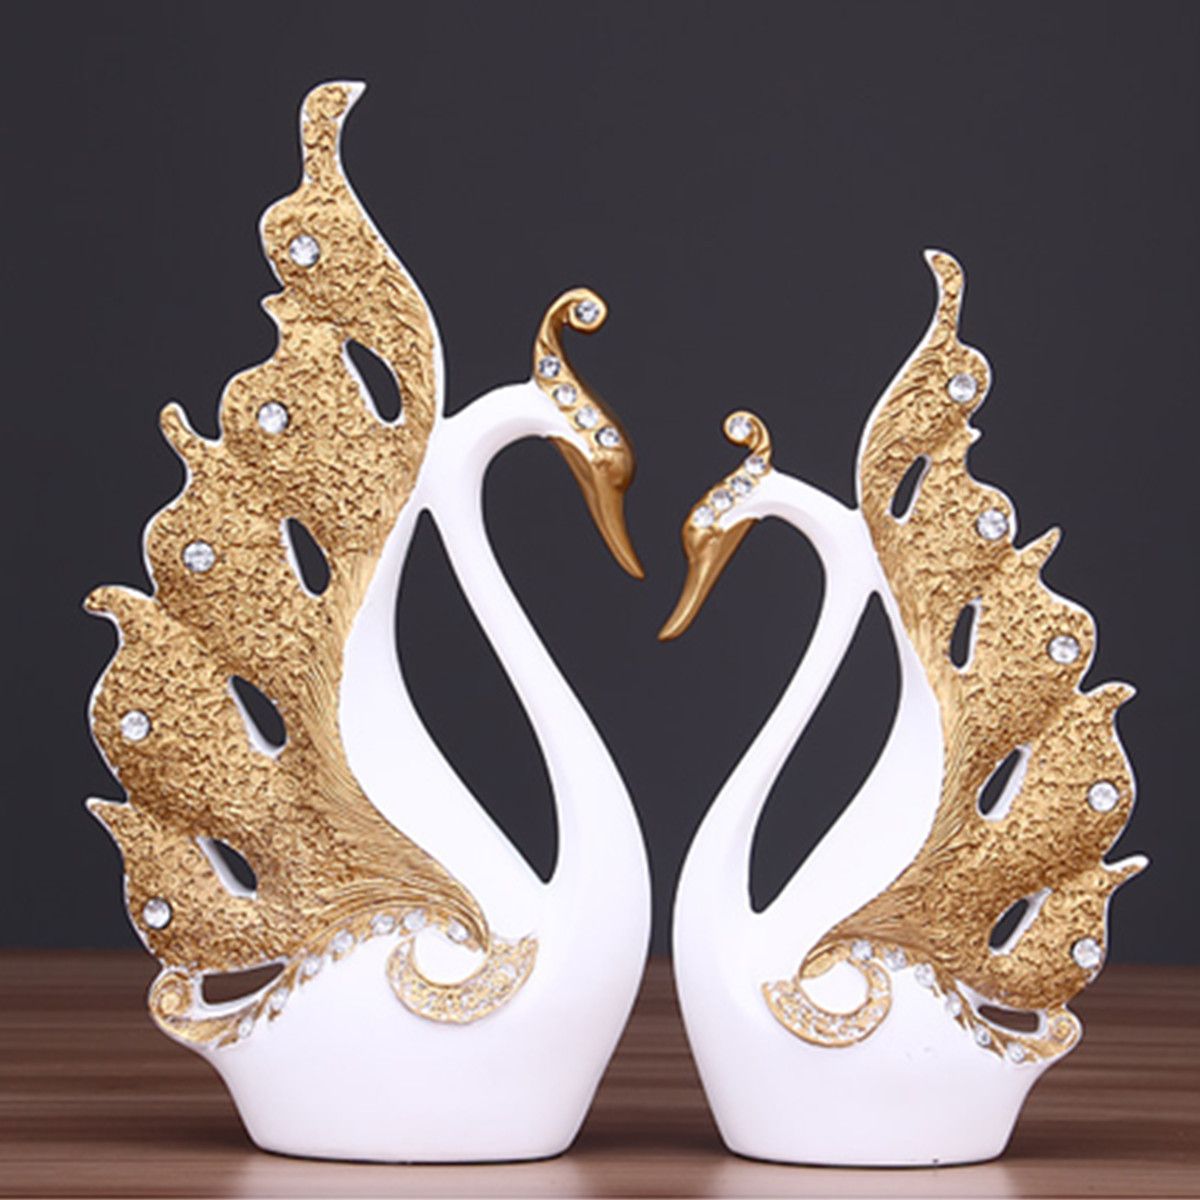 Couple-Swan-Ornament-House-Decorations-Accessories-Living-Room-TV-Cabinet-Wedding-Gifts-1490856